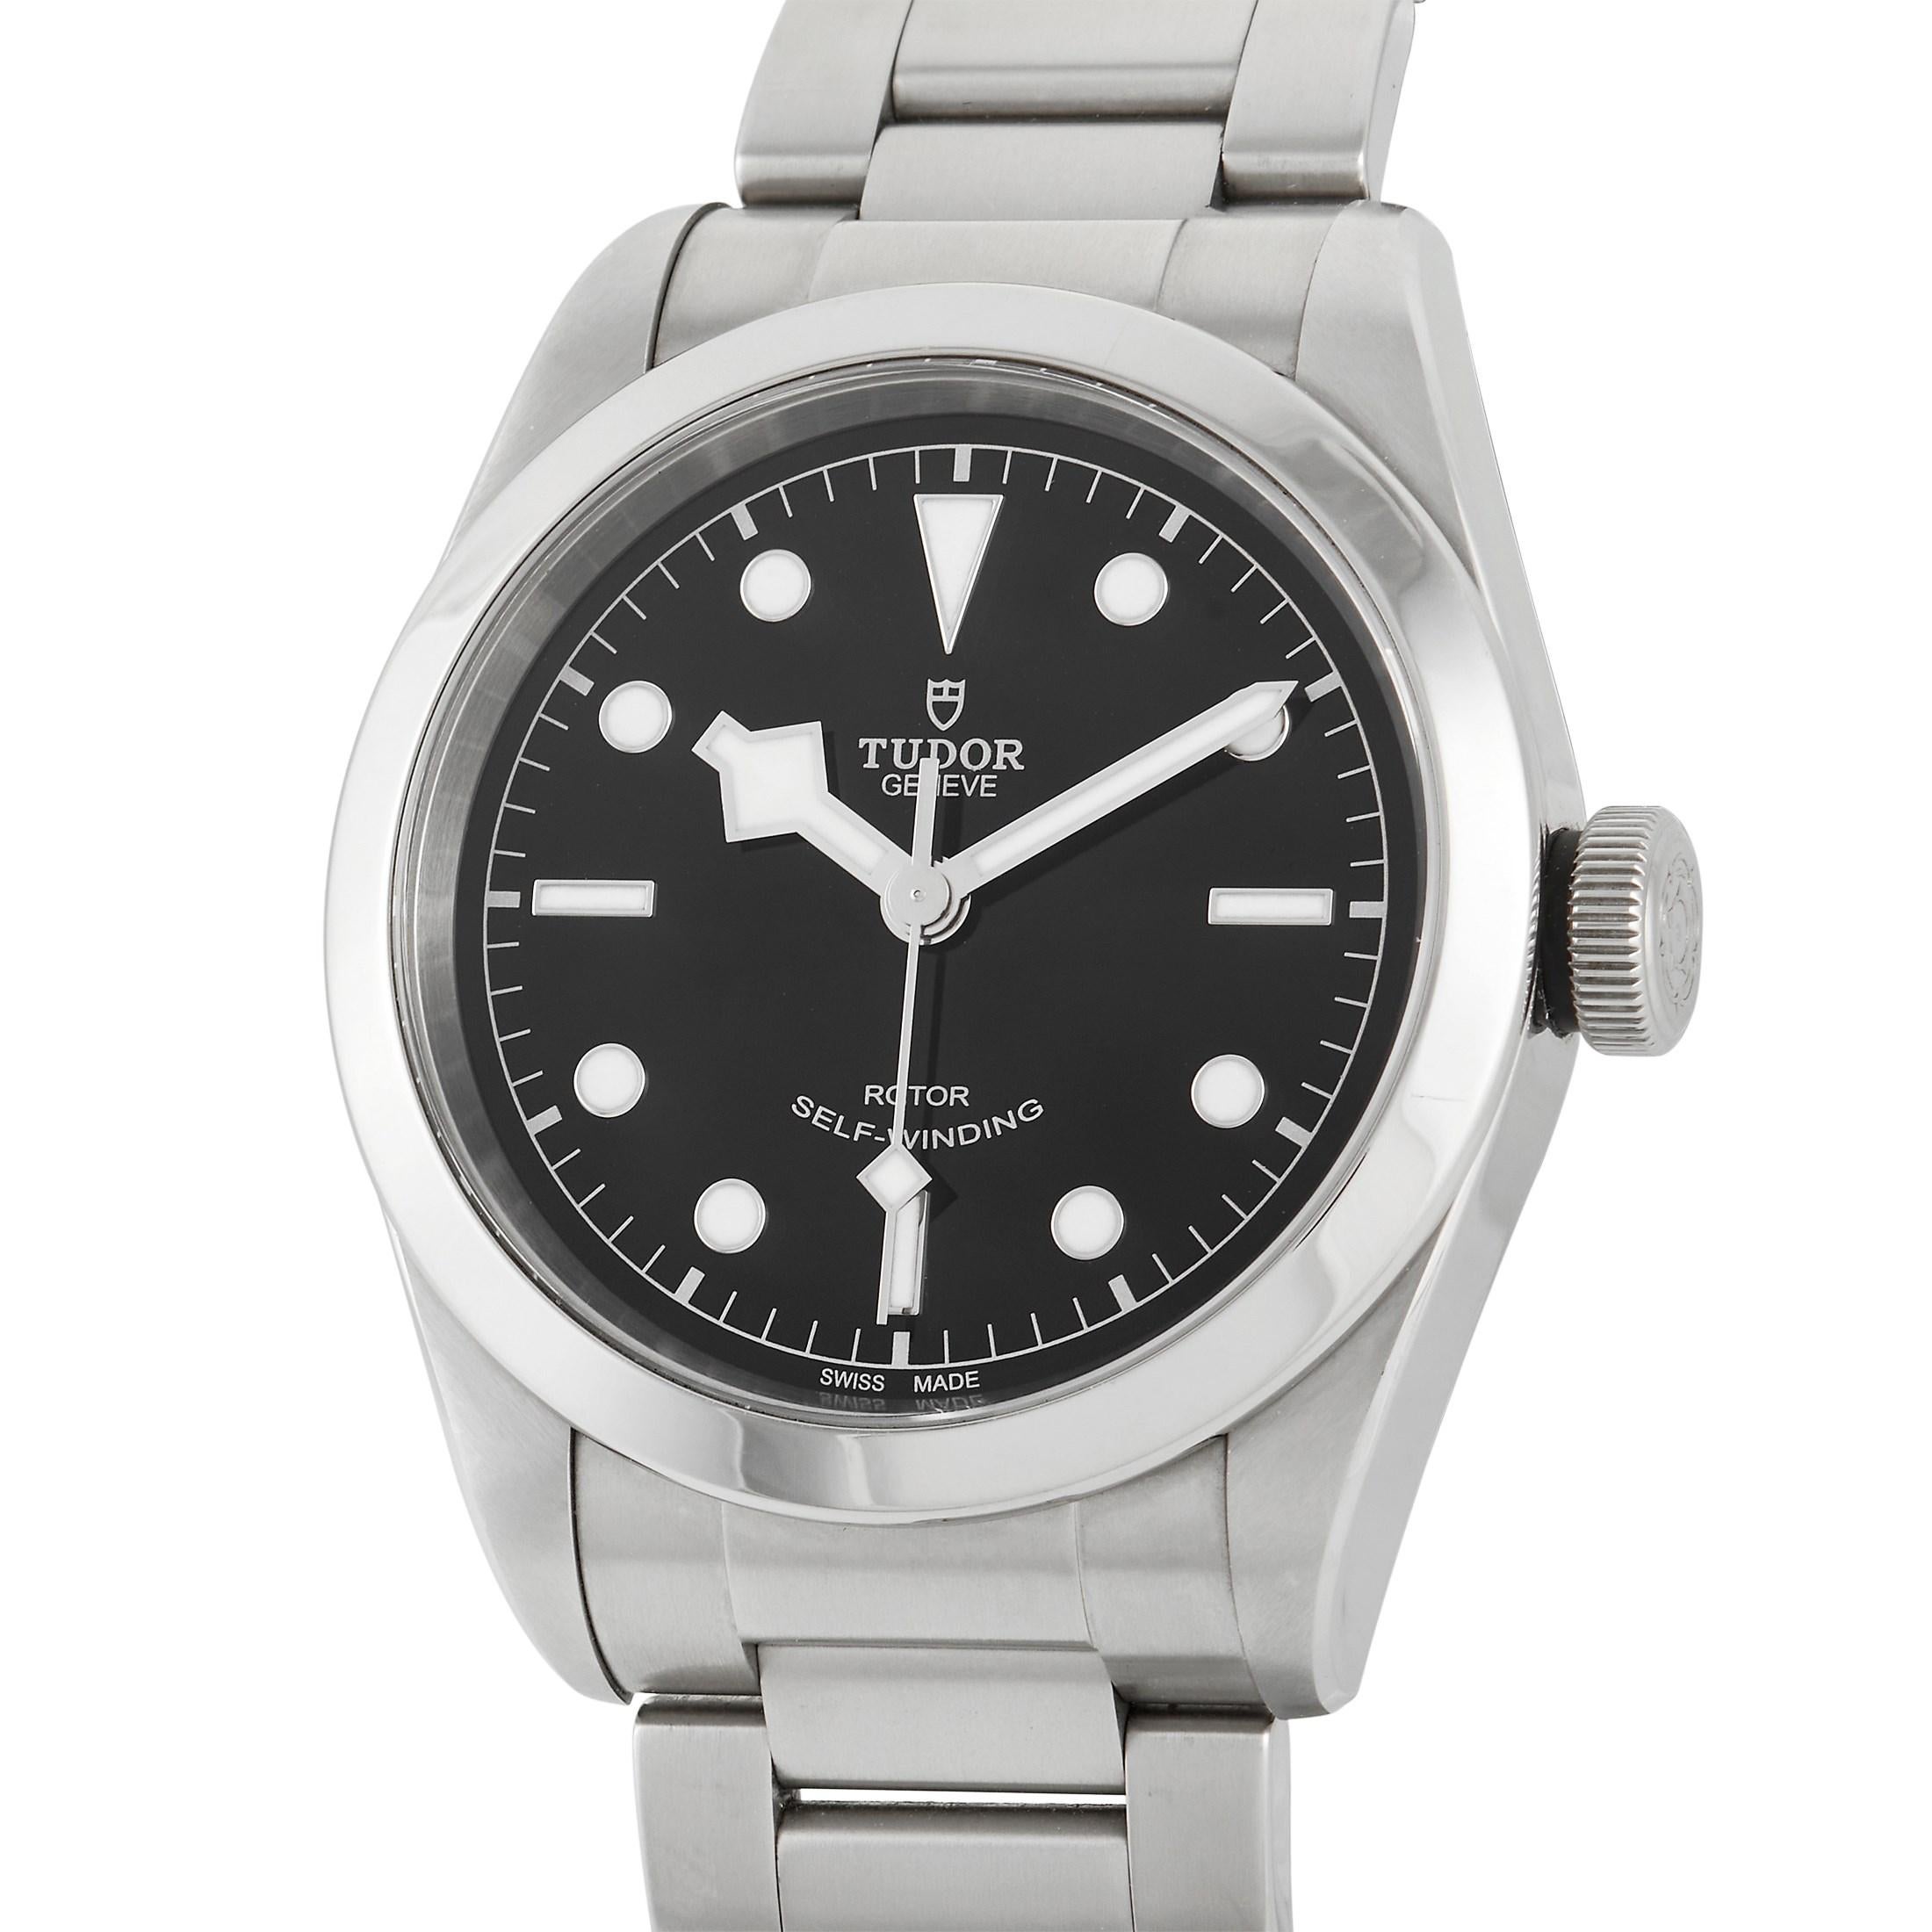 The Tudor Heritage Black Bay Watch, reference number 79540, maintains a bold, straightforward sense of style. 

This stately timepiece features a stainless steel case, a stainless steel bracelet, and a fixed smooth stainless steel bezel. On the bold